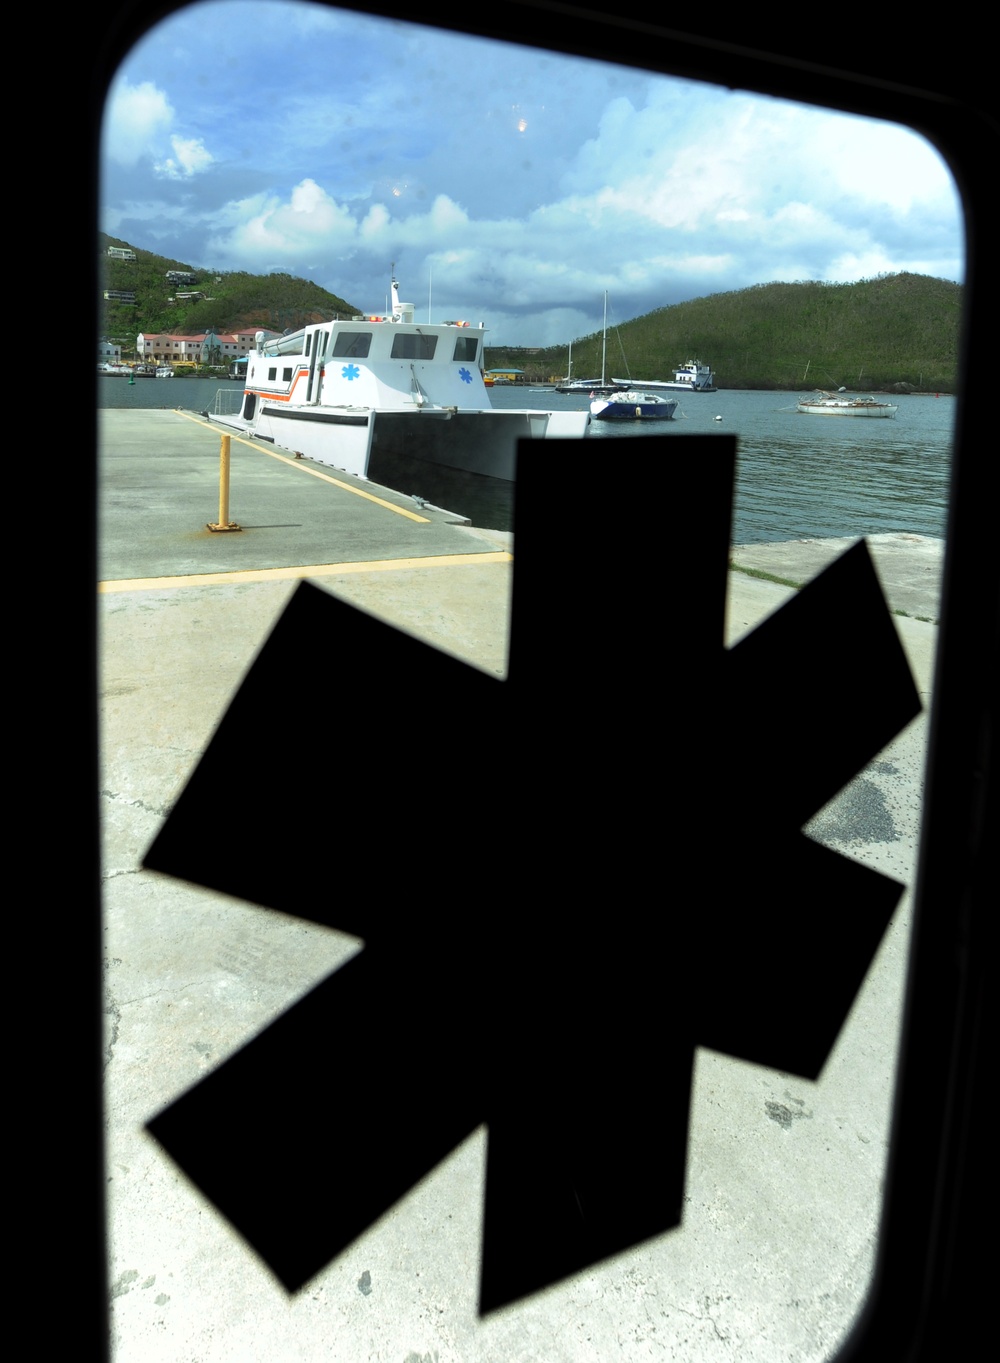 A Boat That is Used to Transport Patients Between Islands is Pictured